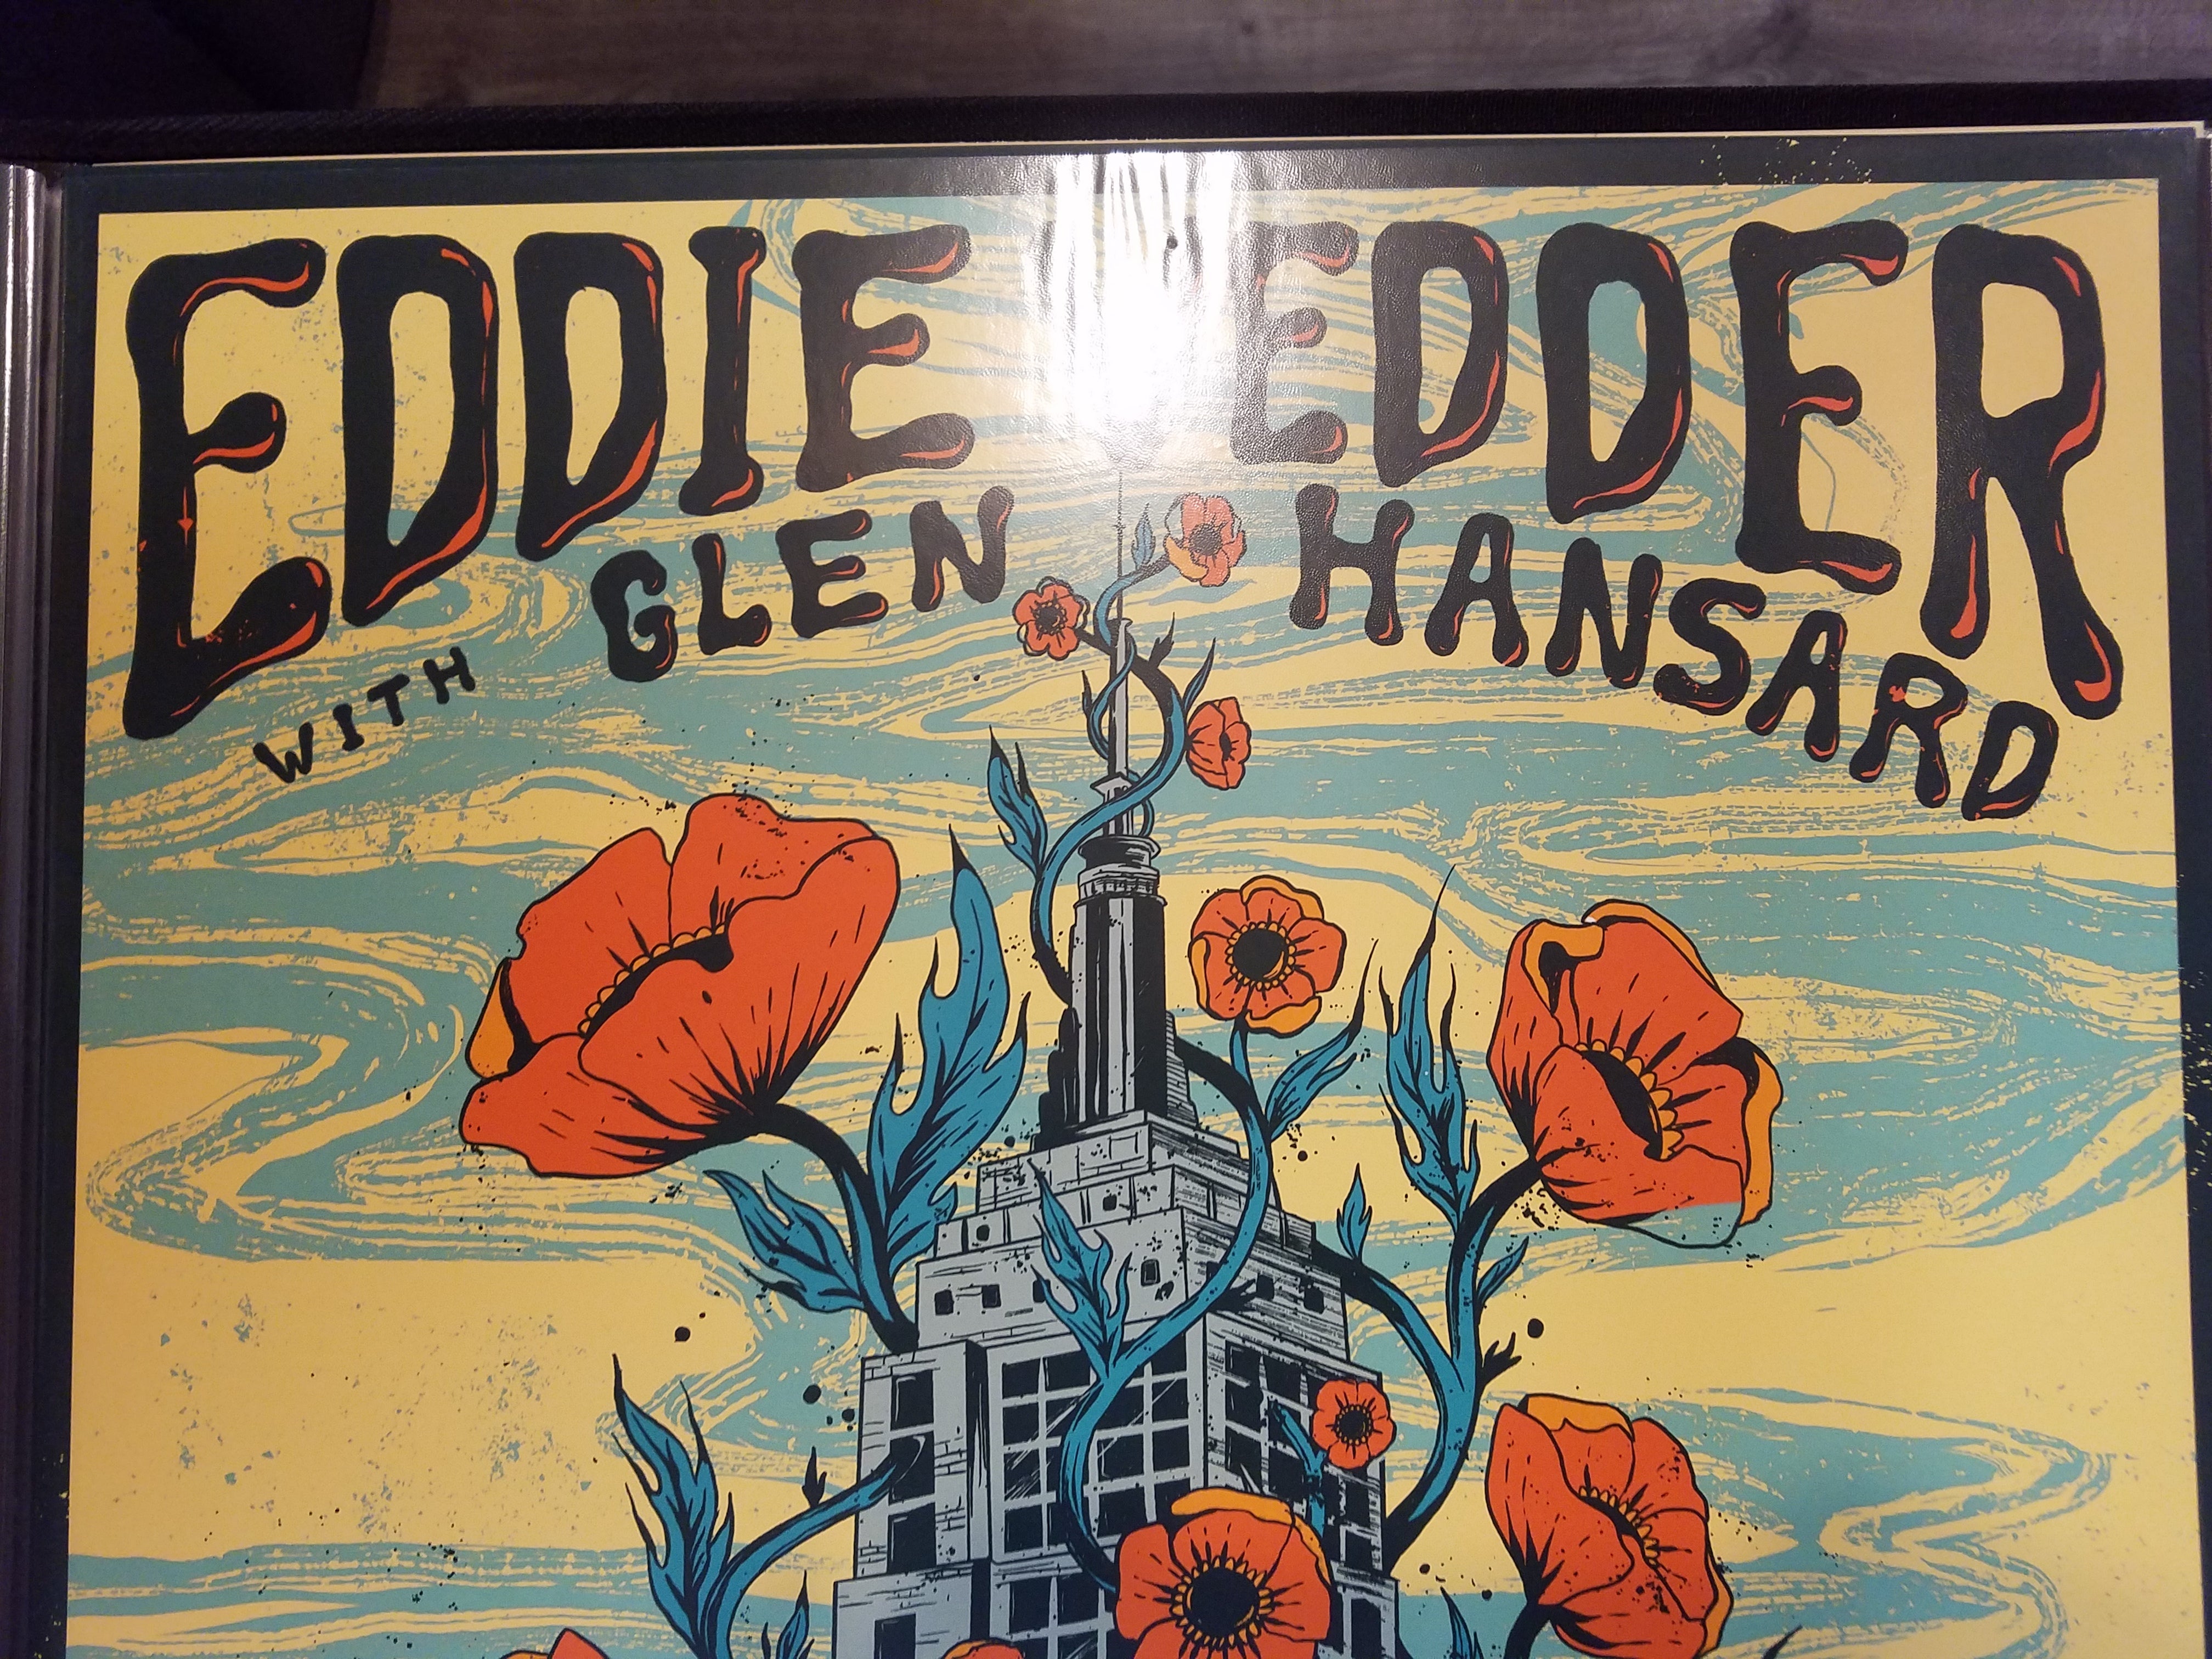 Title:  Eddie Vedder 2/3/22 Beacon Theatre AP Poster  Poster artist:  Evangeline Gallagher  Edition:  xx/100 s/n  Type:  Screen Print  Size:  24" x 18"  Location: New York, NY  Venue: Beacon Theatre  Notes:   Signed and numbered by artist.  7-color print.  In house ready to ship!